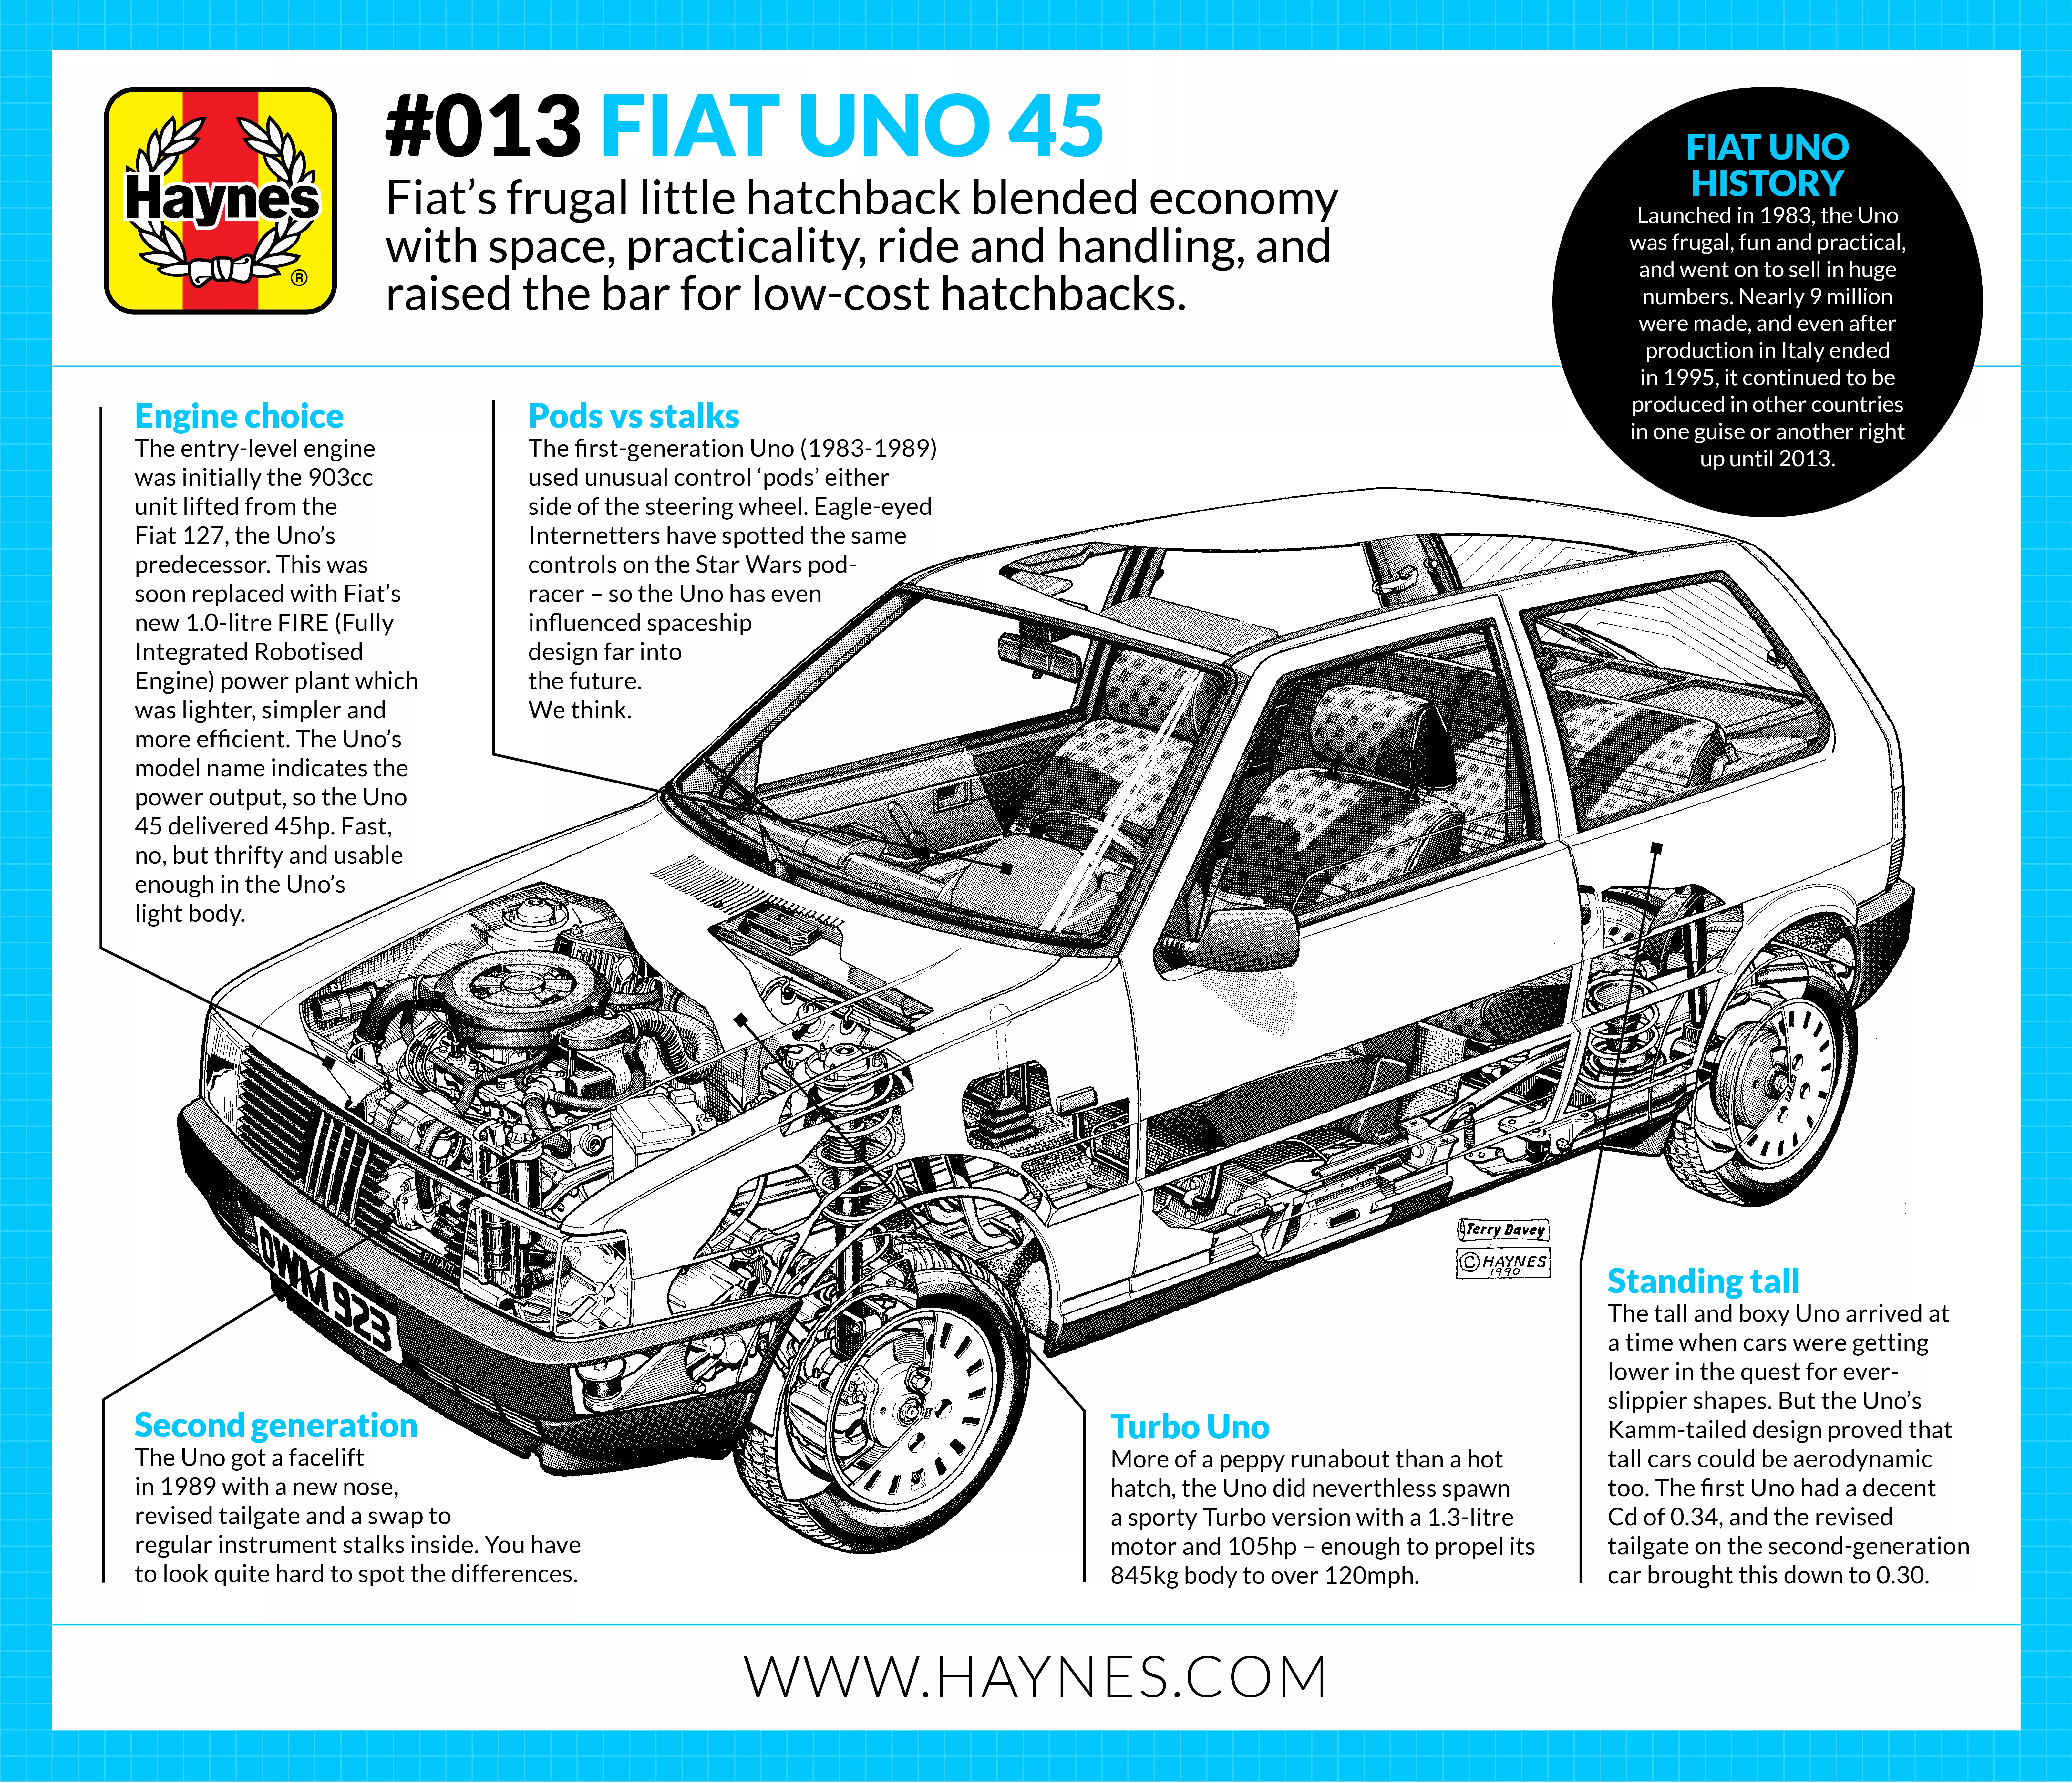 A short history of the Fiat Uno